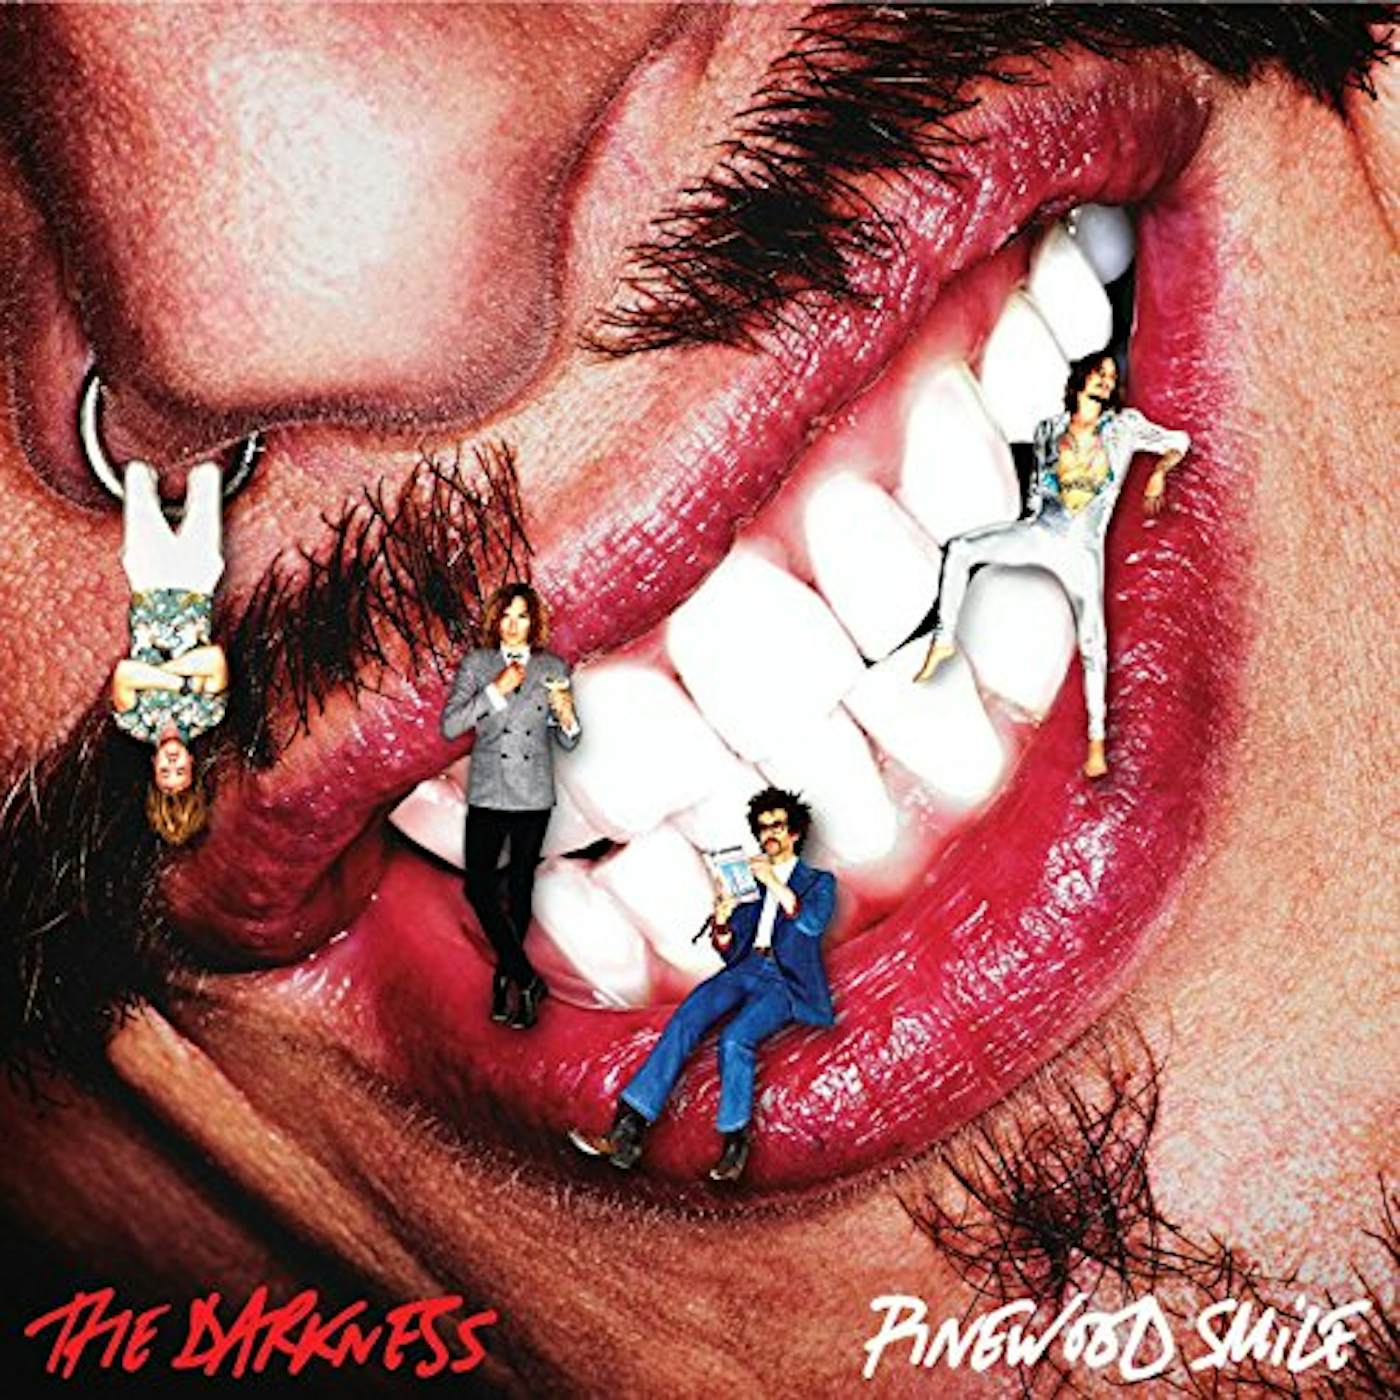 The Darkness PINEWOOD SMILE CD